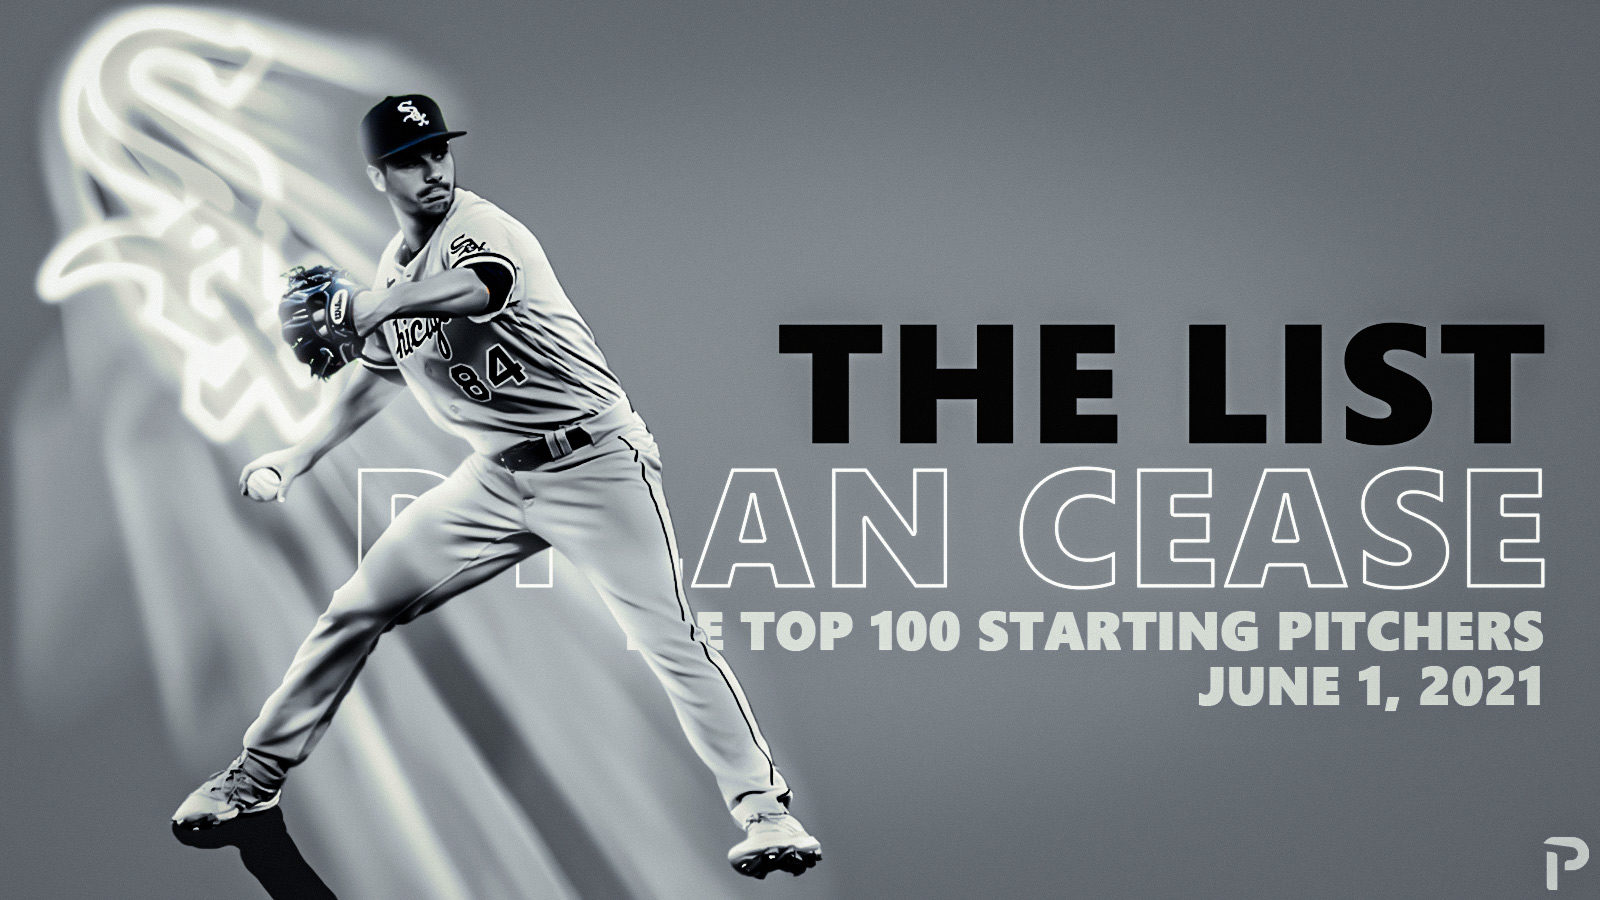 10 Years of Excellence: VSN's No. 1 Pitcher of the Decade